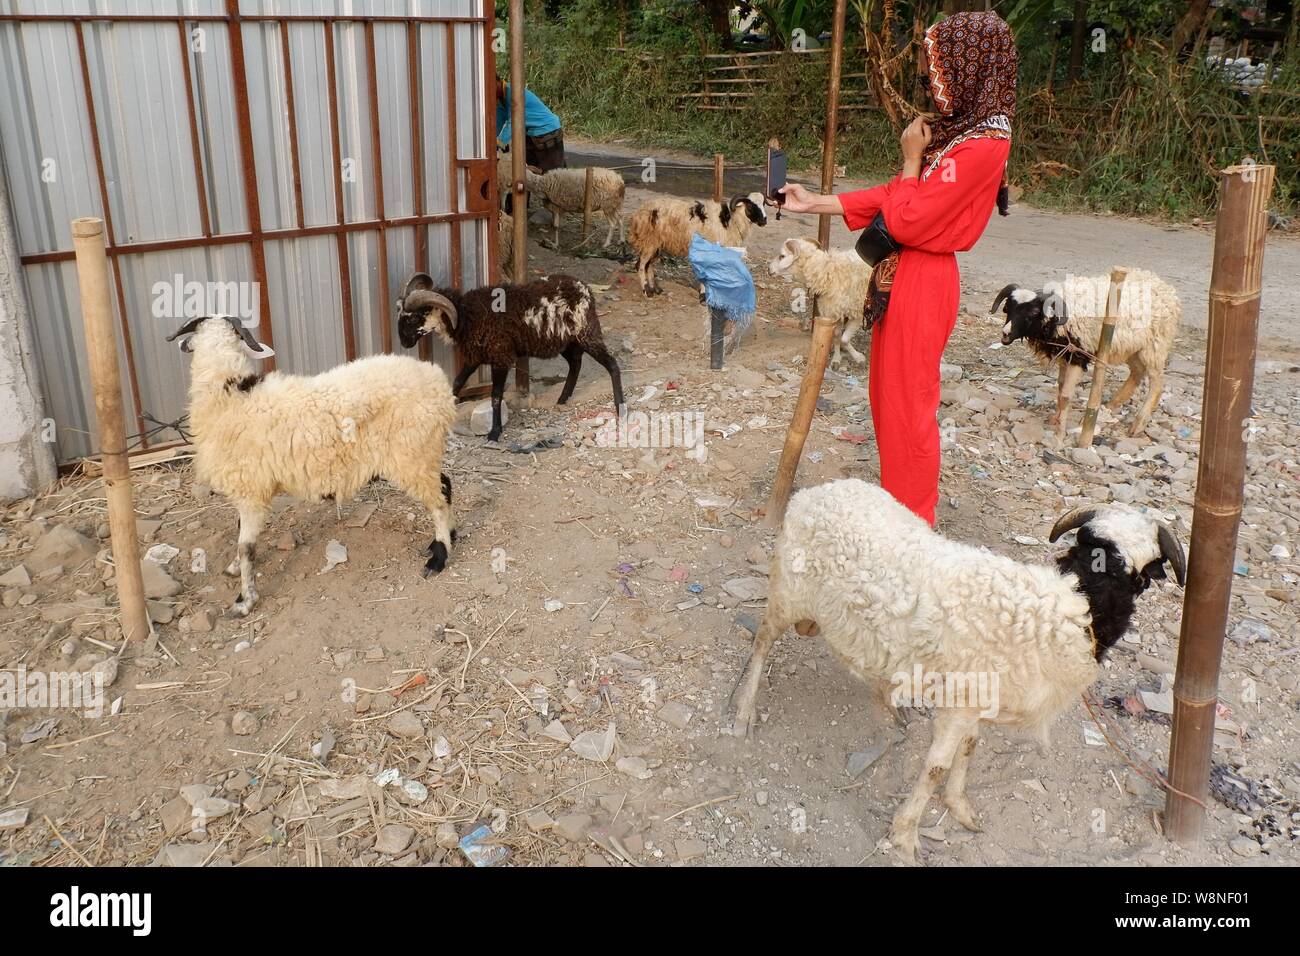 A muslim woman check the sheep in a stock husbandry to choose which one to buy. Stock Photo